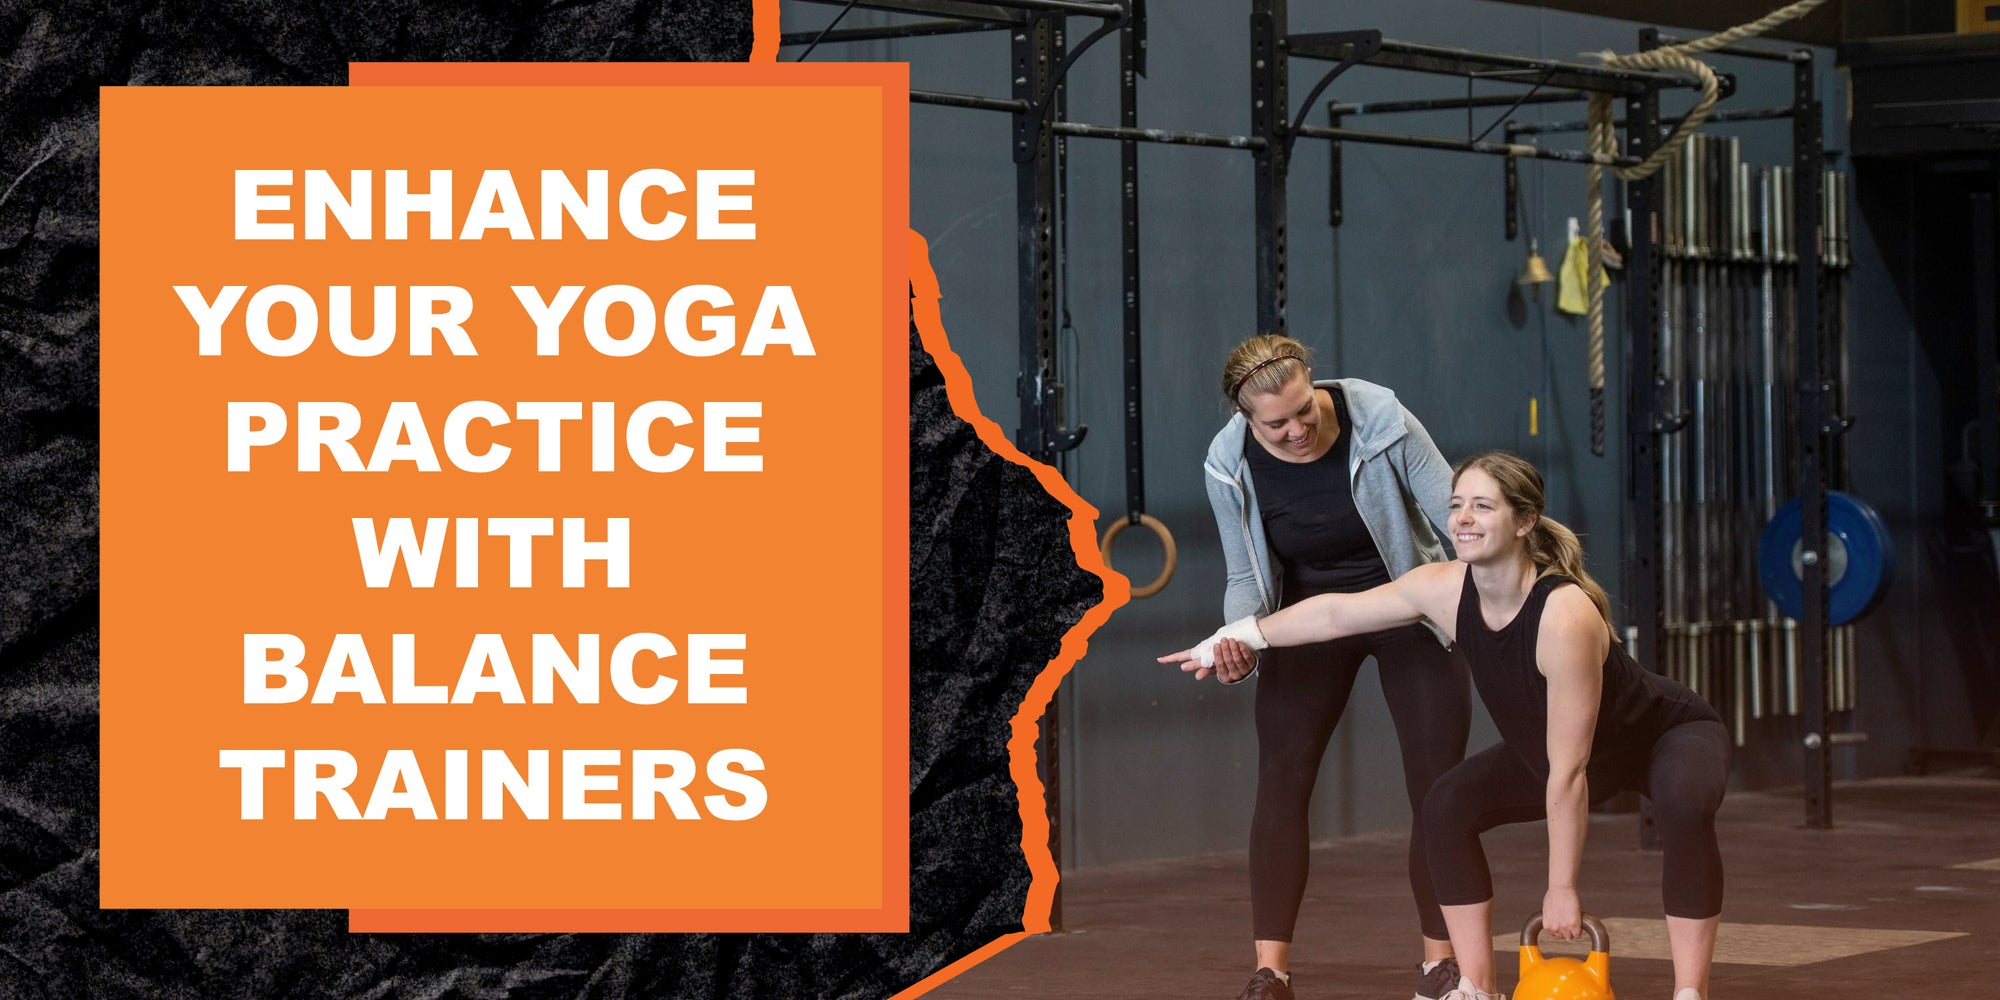 Enhance Your Yoga Practice With Balance Trainers